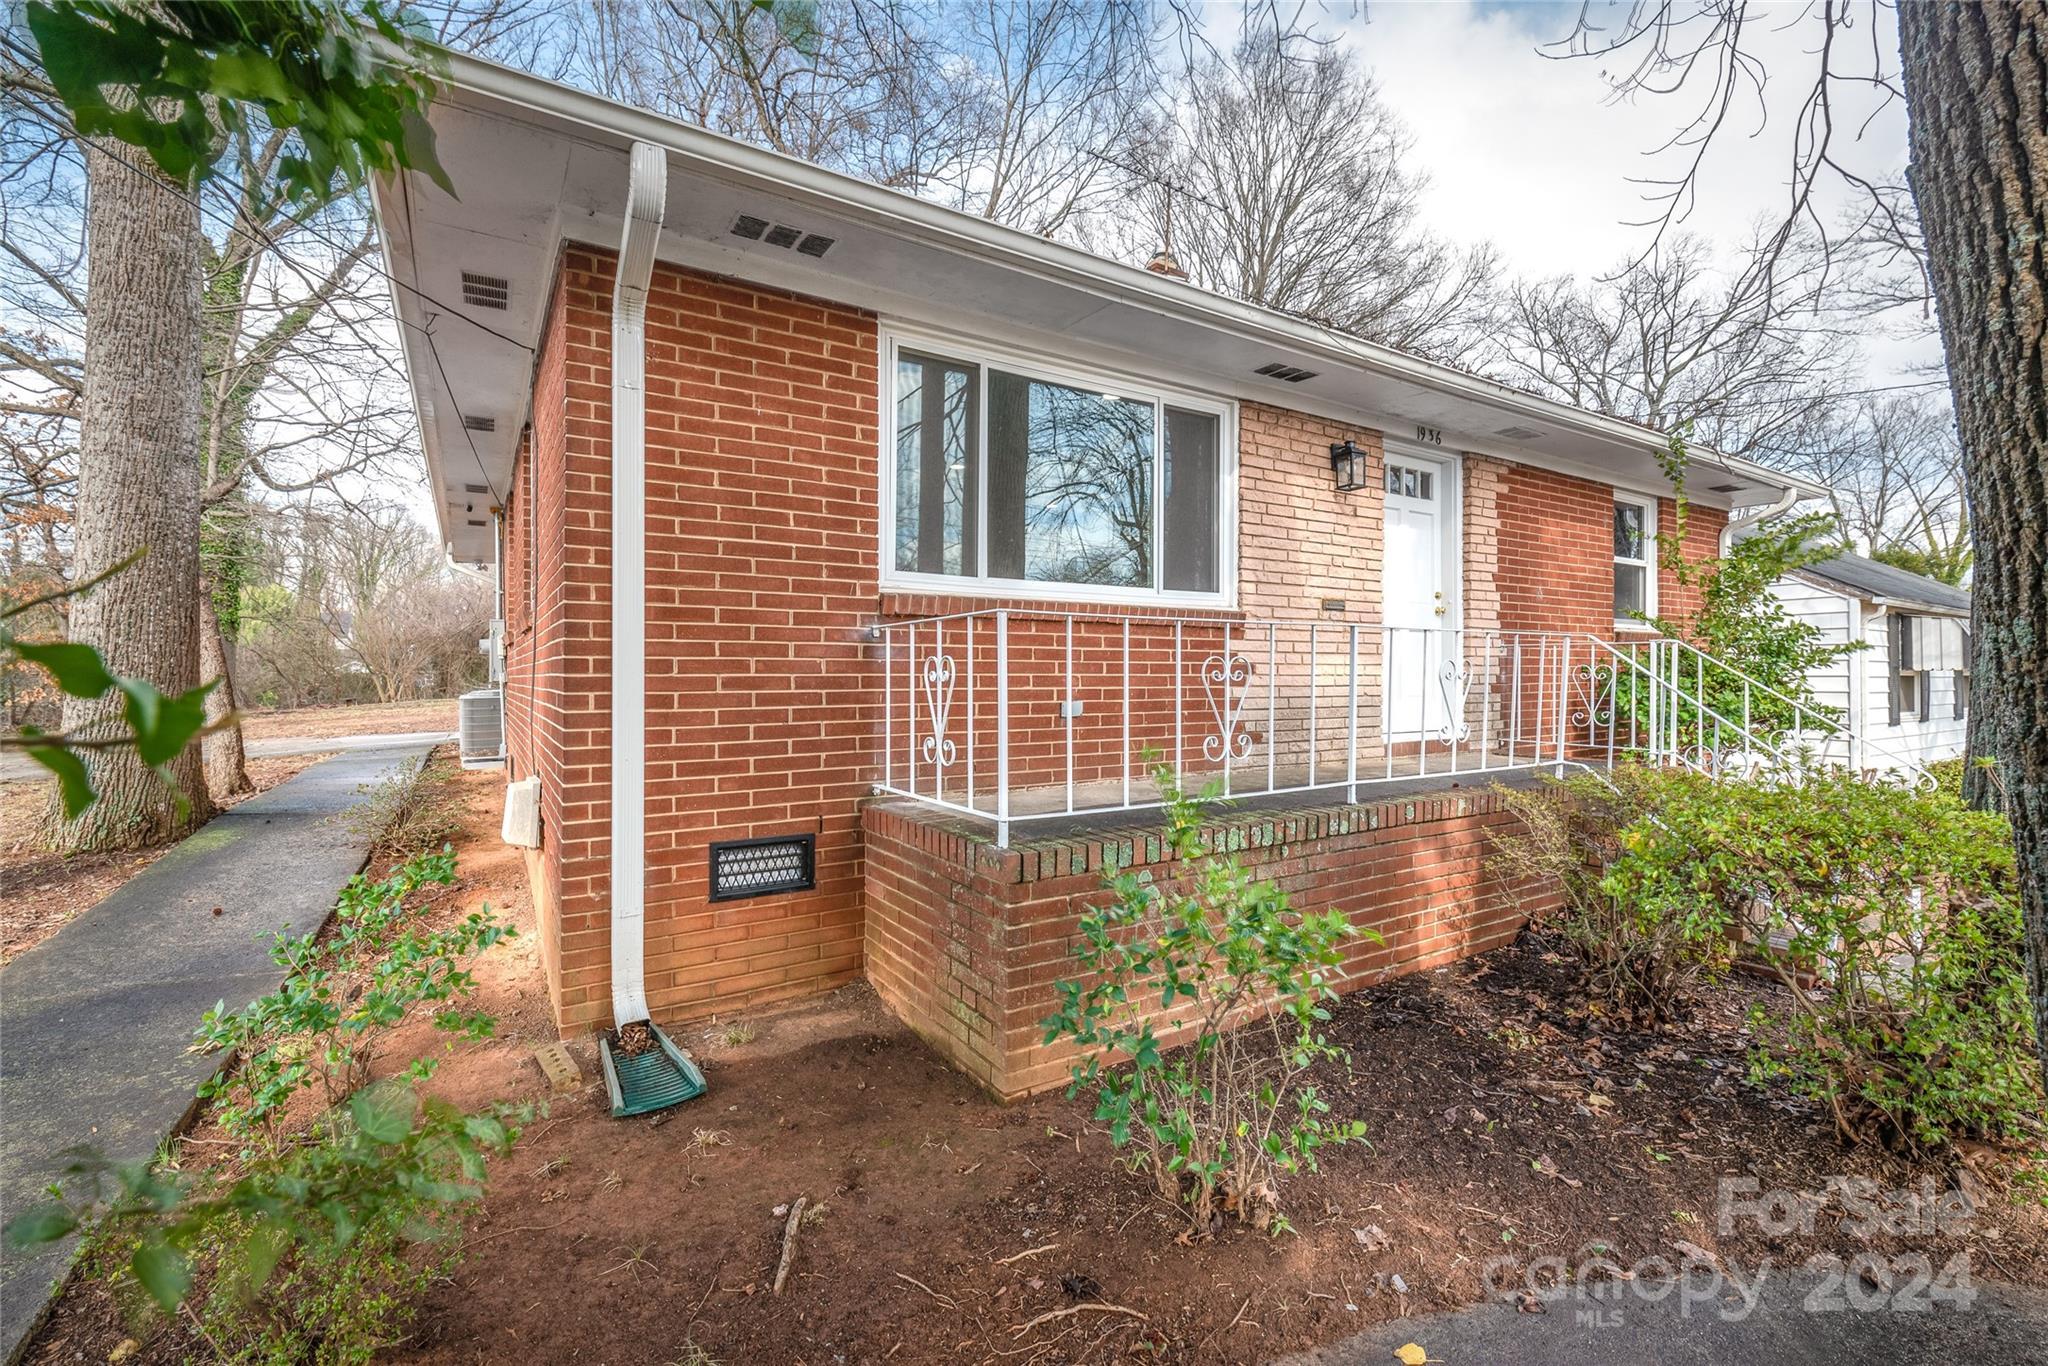 Photo one of 1936 Russell Ave Charlotte NC 28216 | MLS 4114433